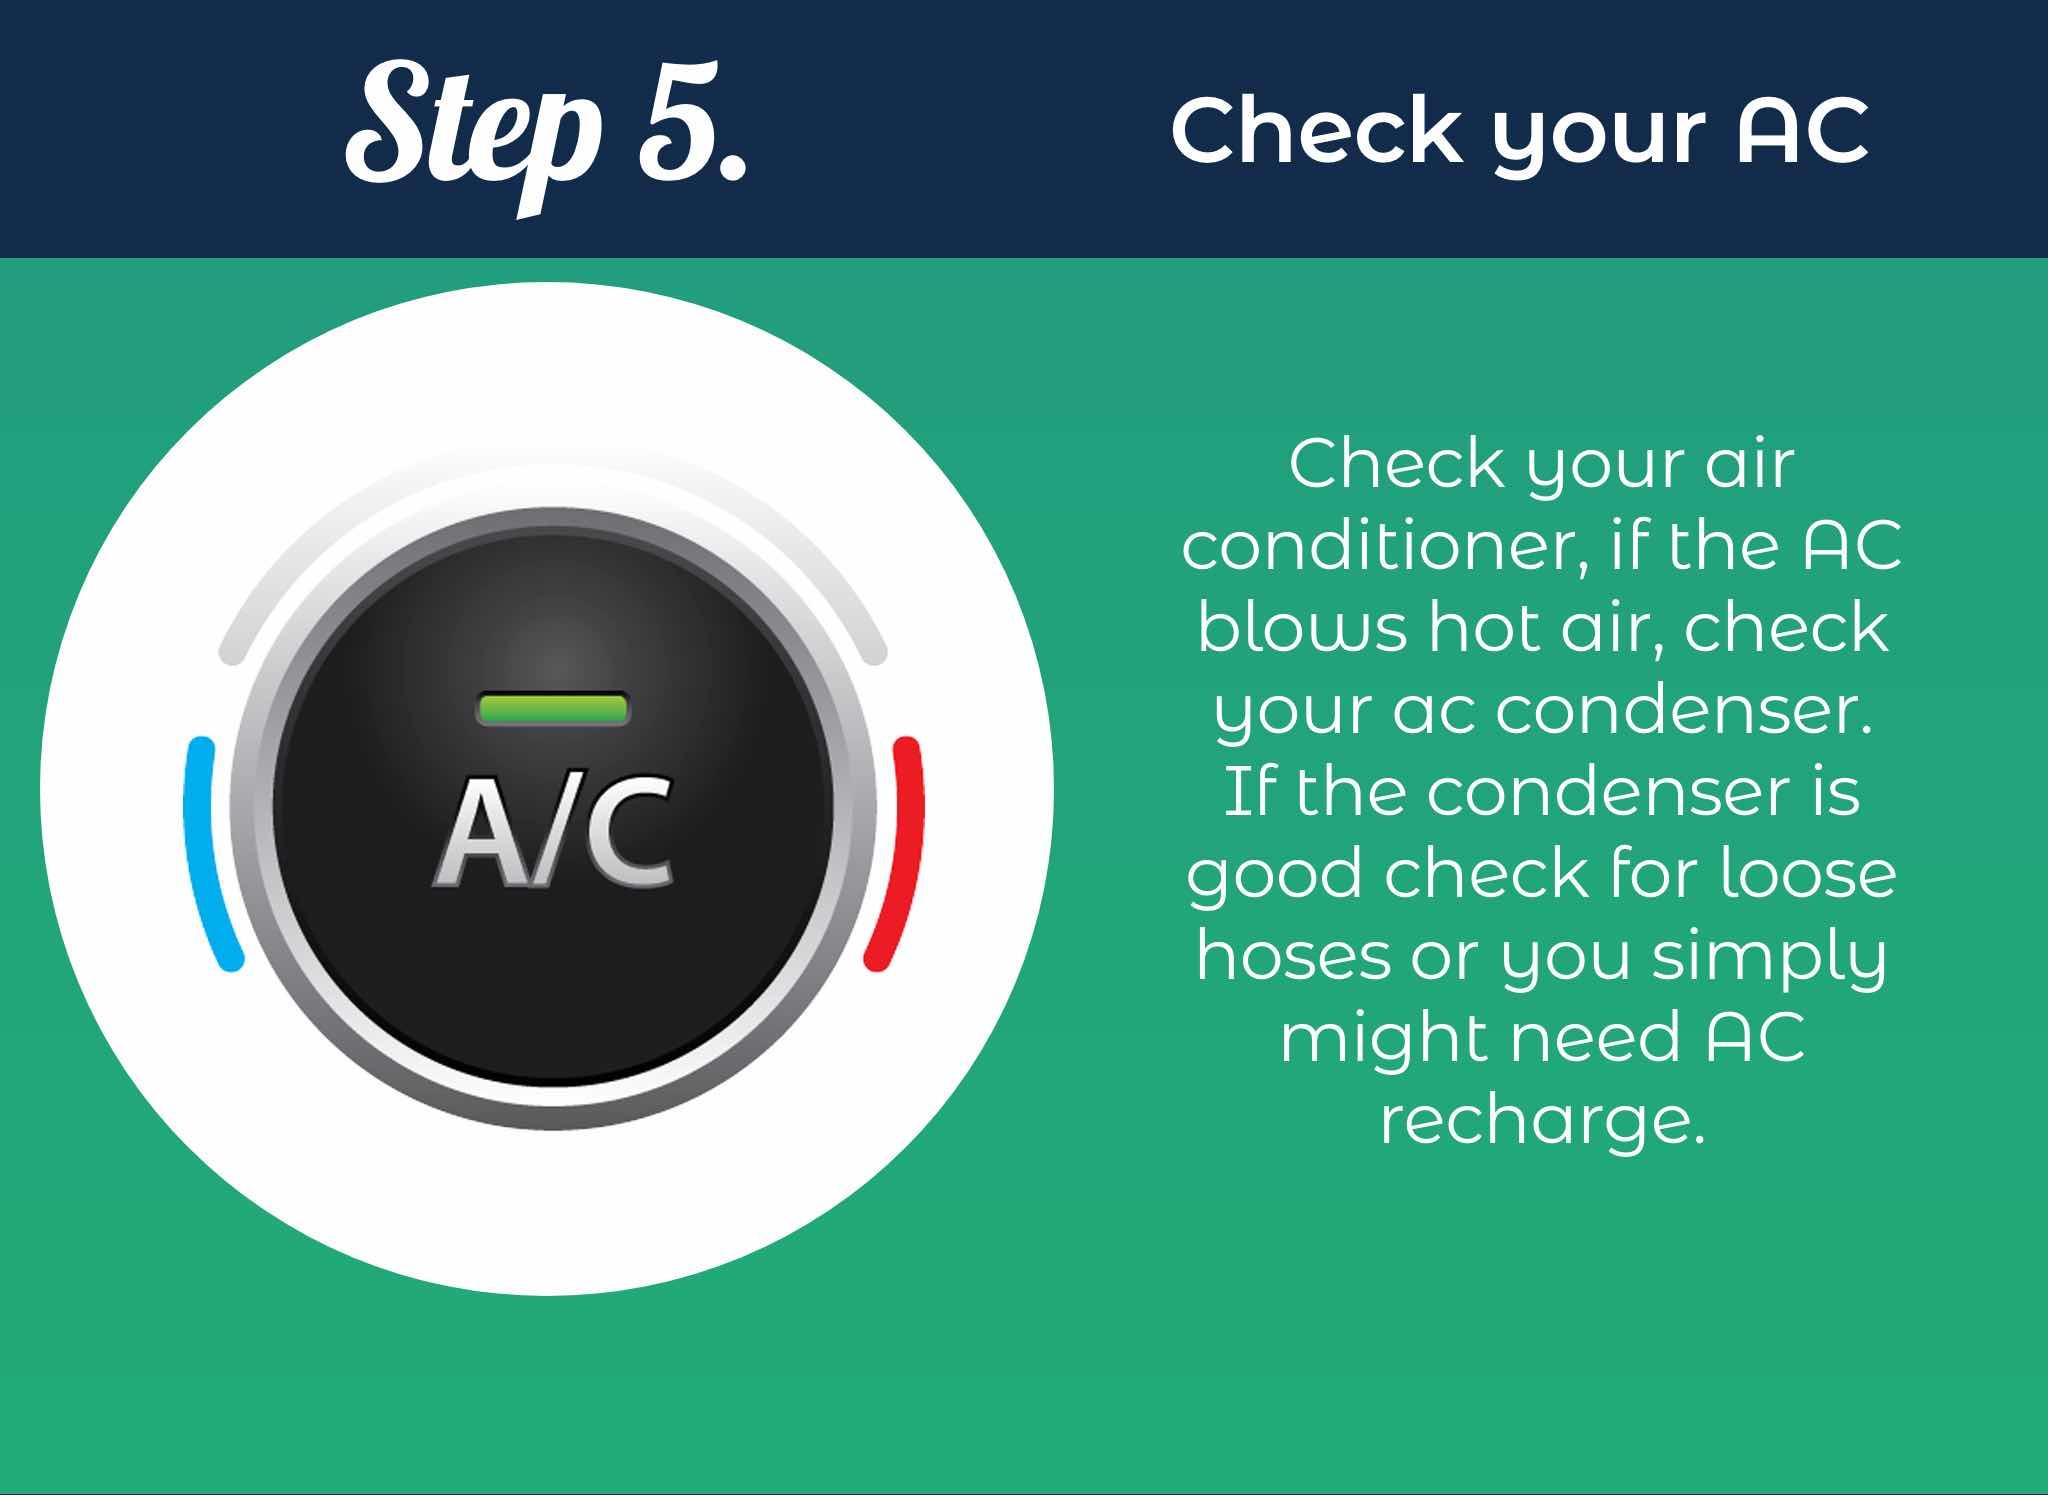 Check your air conditioner, if the AC blows hot air, check your ac condenser. If the condenser is good, check for loose hoses or you simply might need AC recharge.